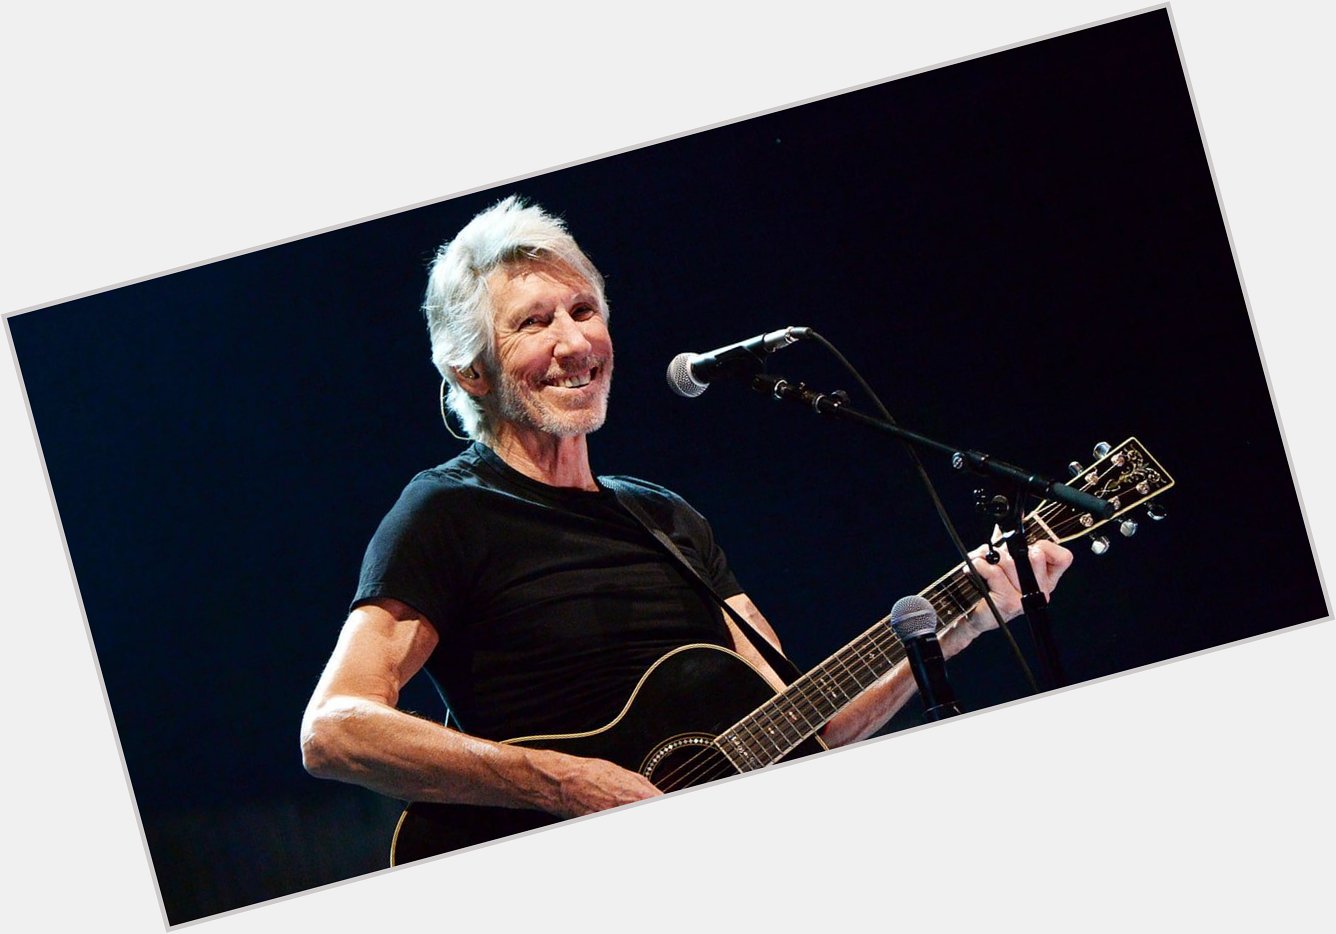 Happy birthday to Roger Waters who is 74 today.  